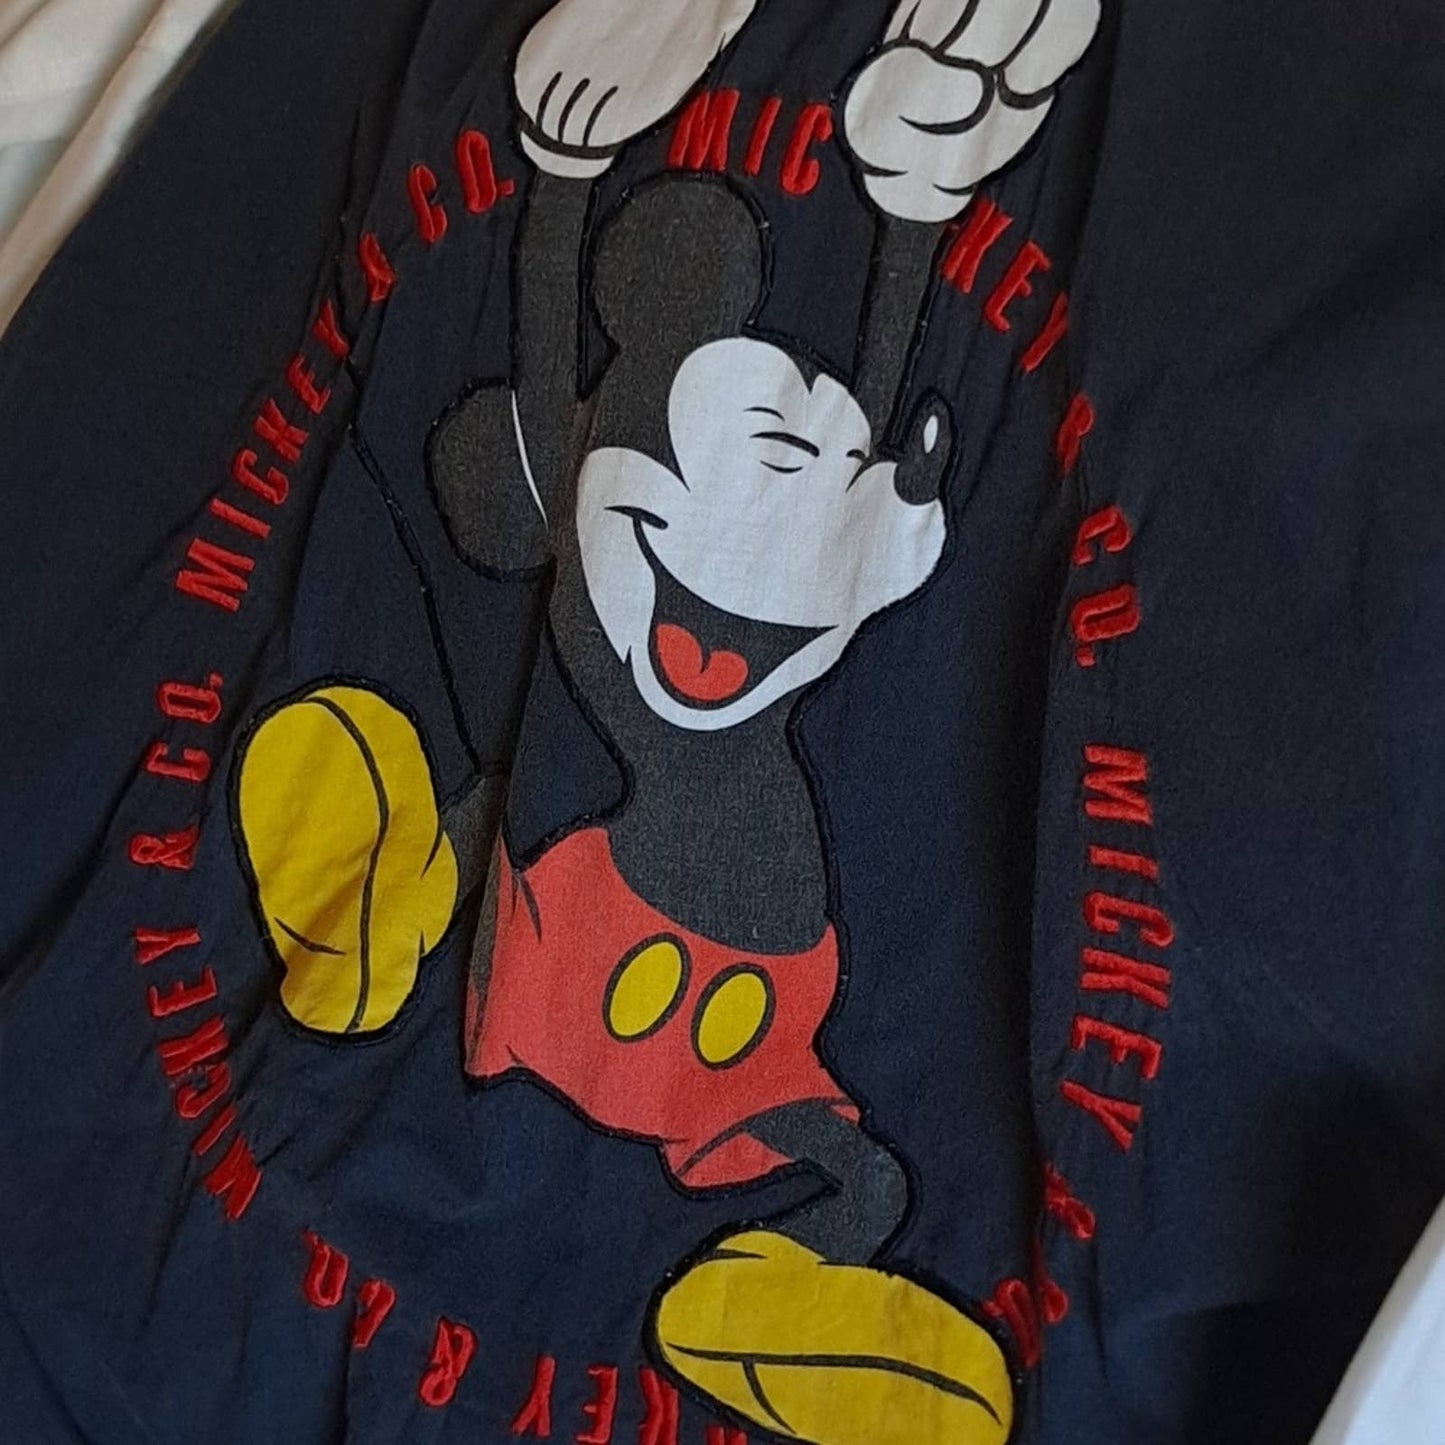 Mickey  multi-colored lined windbreaker with hidden hood. Used but in good shape. LG